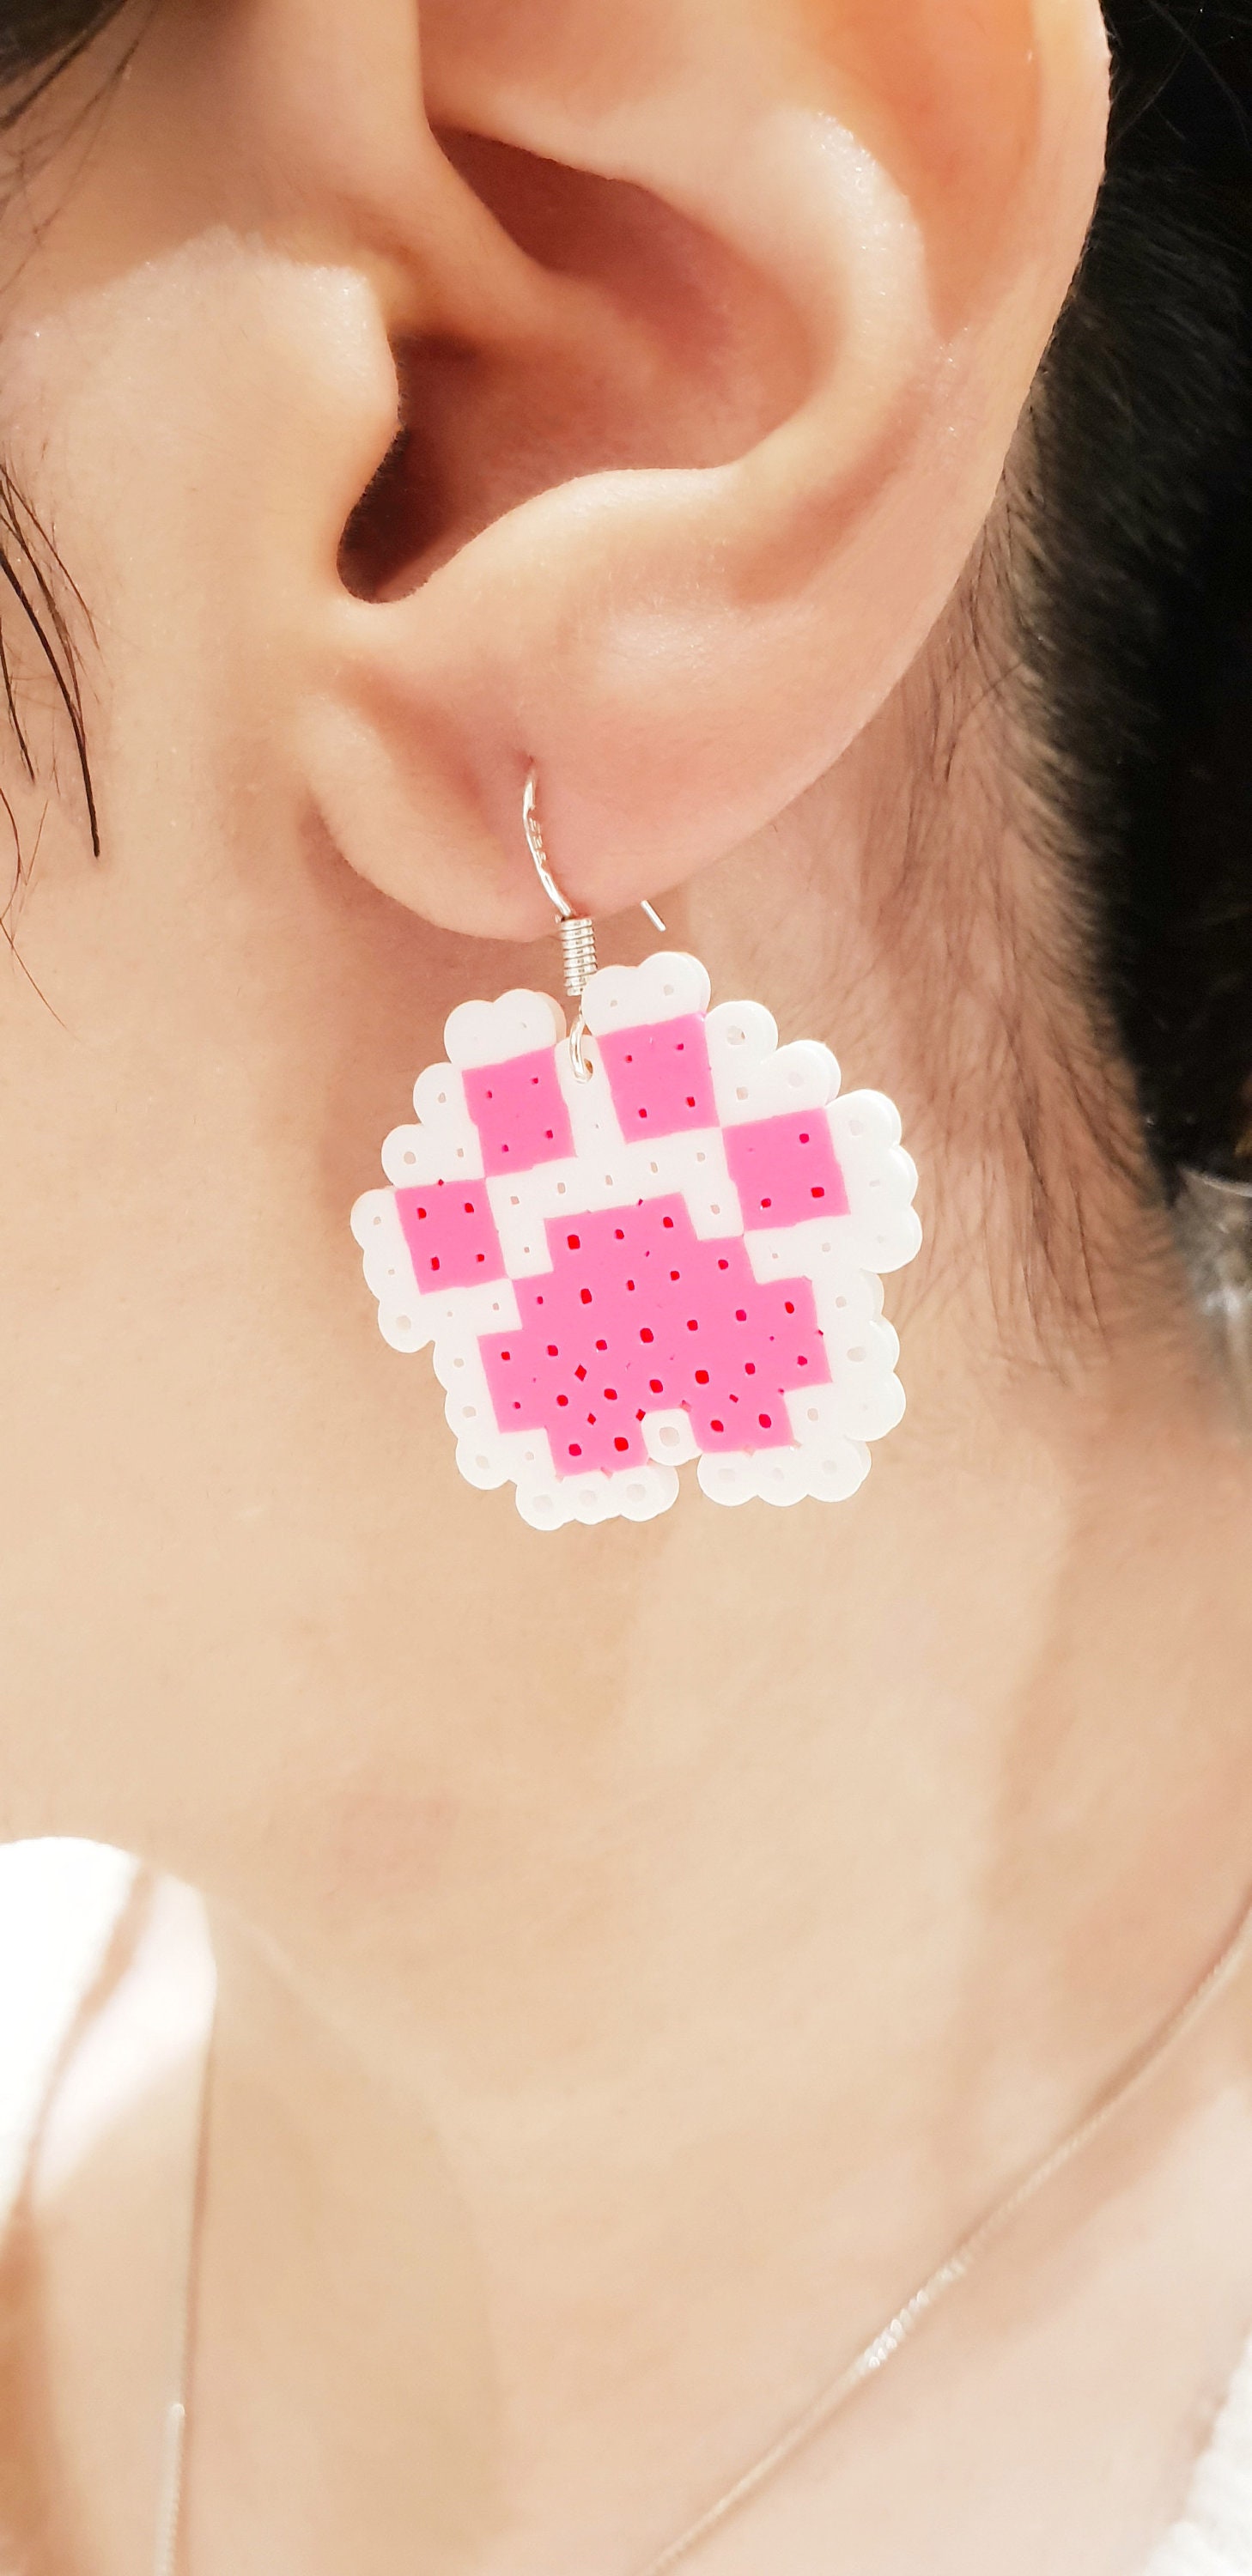 Create Your Own Halloween Earrings with Perler Beads!